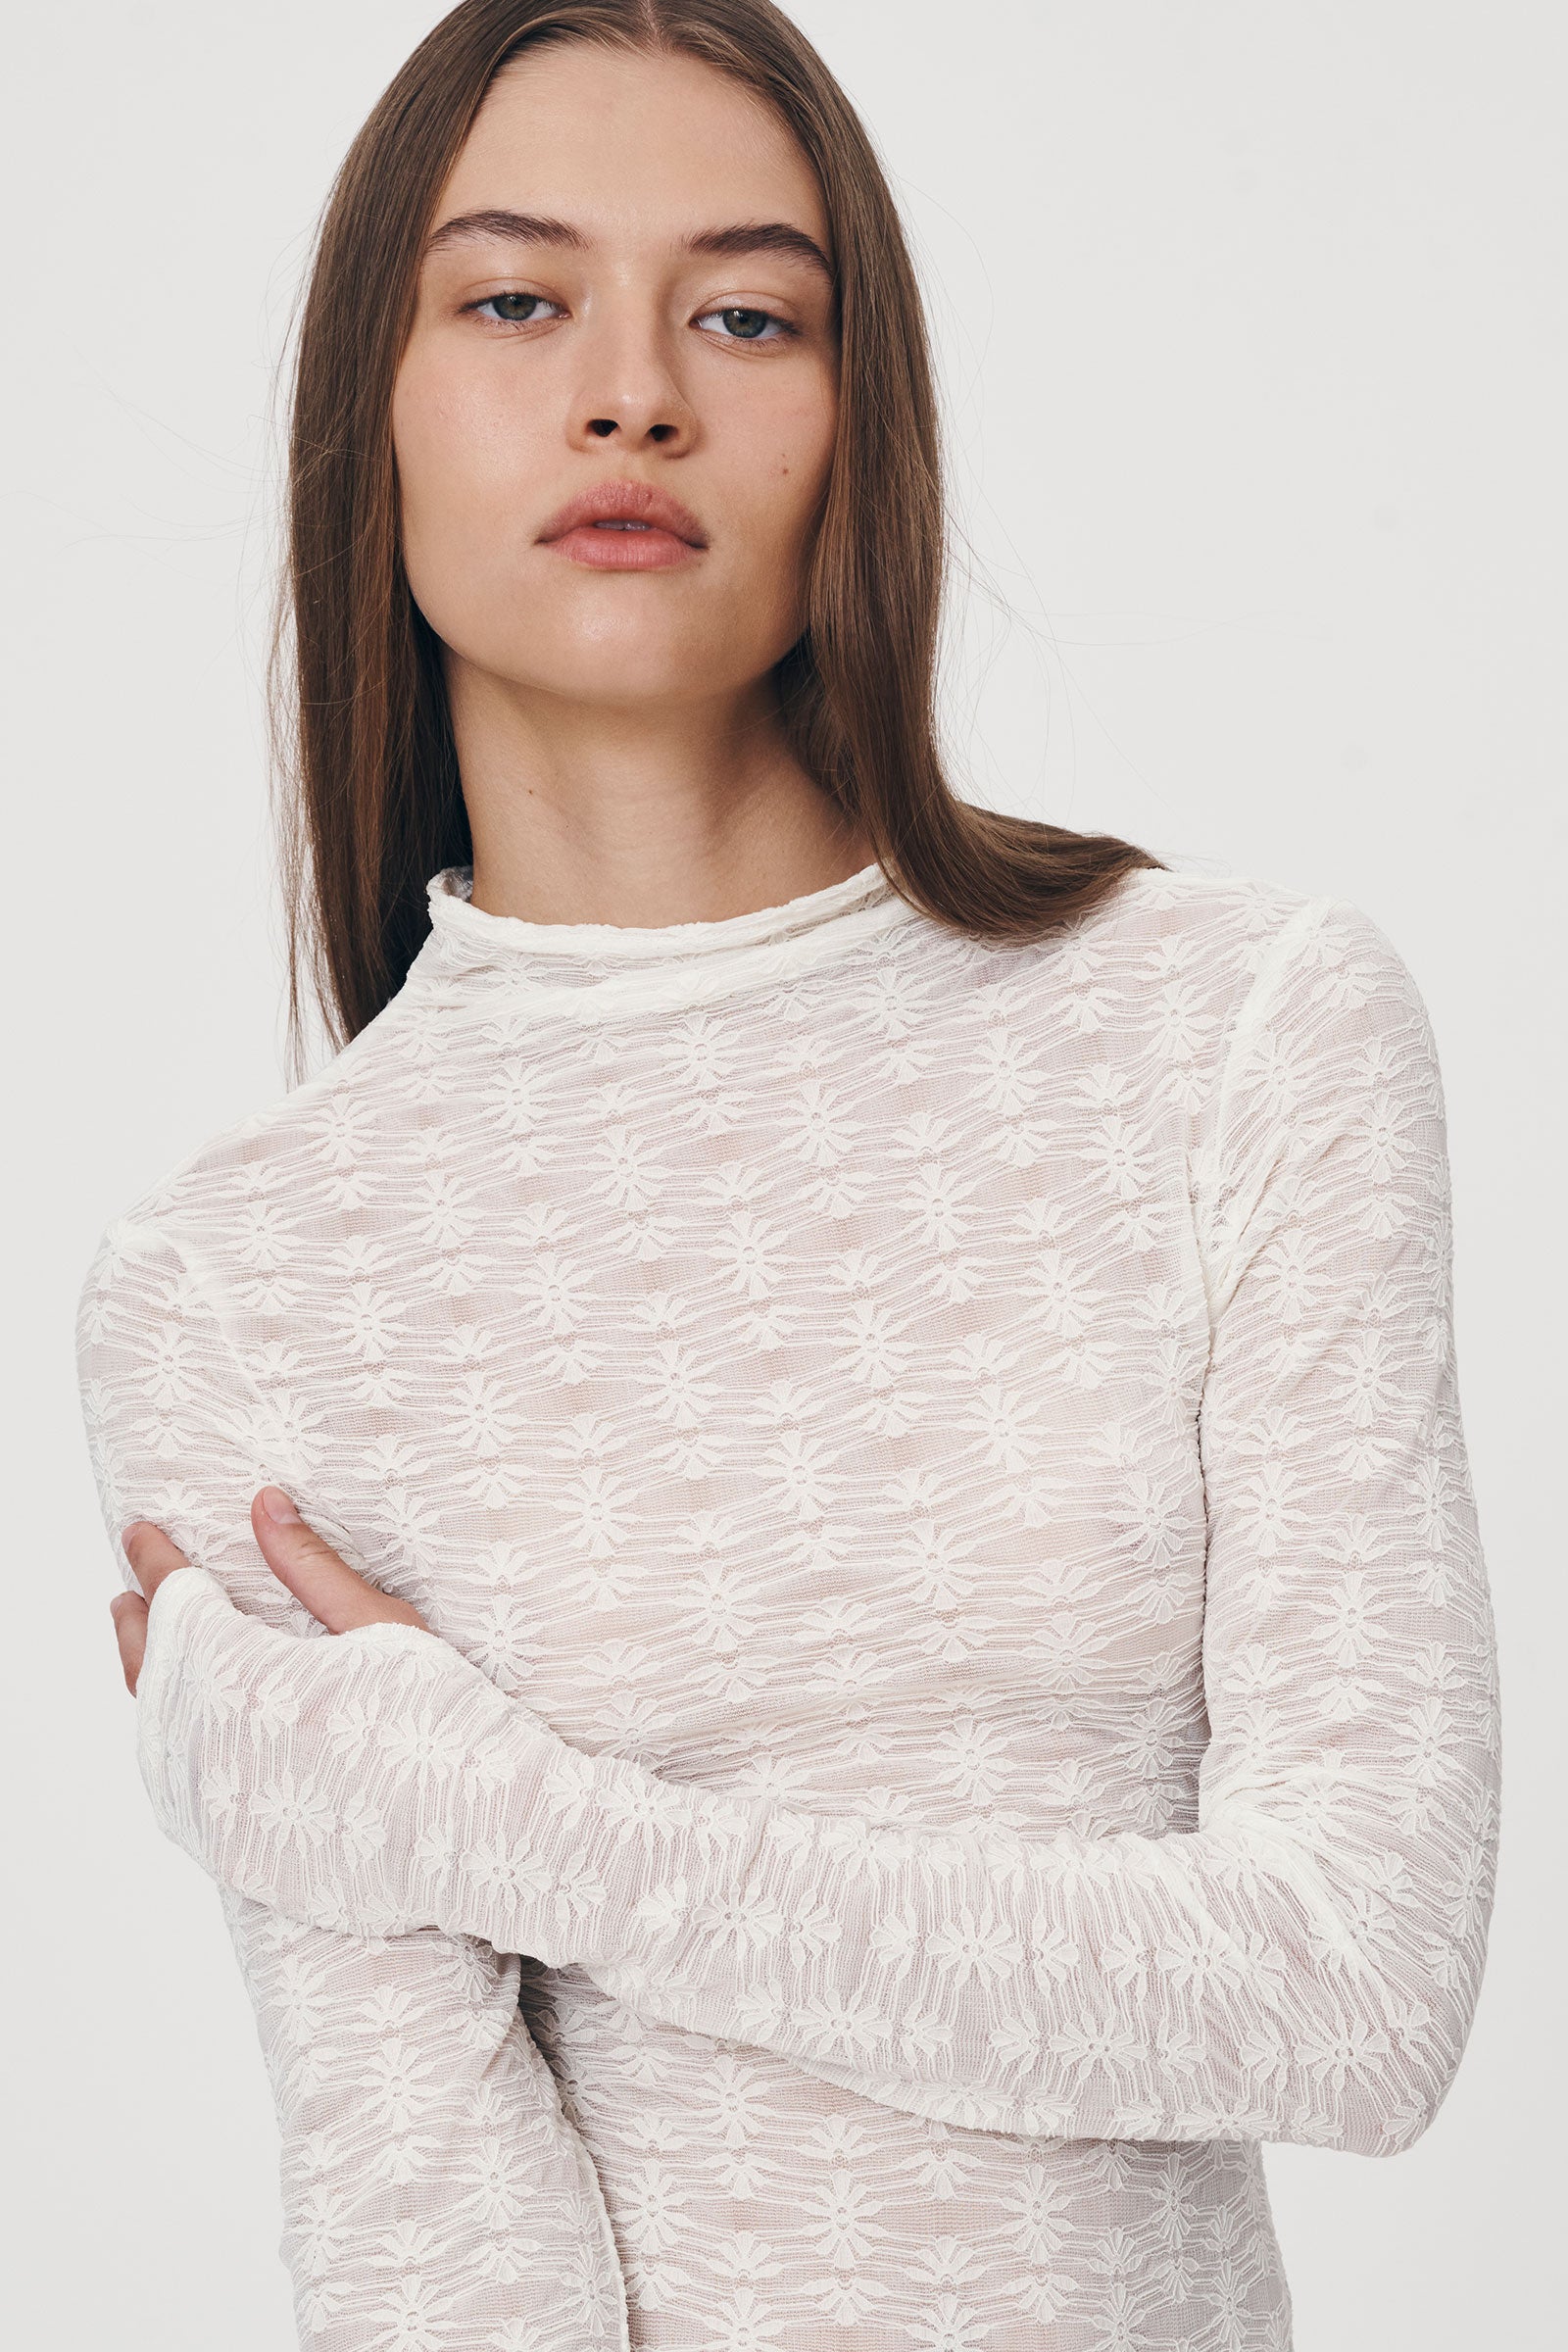 Galo Flower Lace Top // Creme